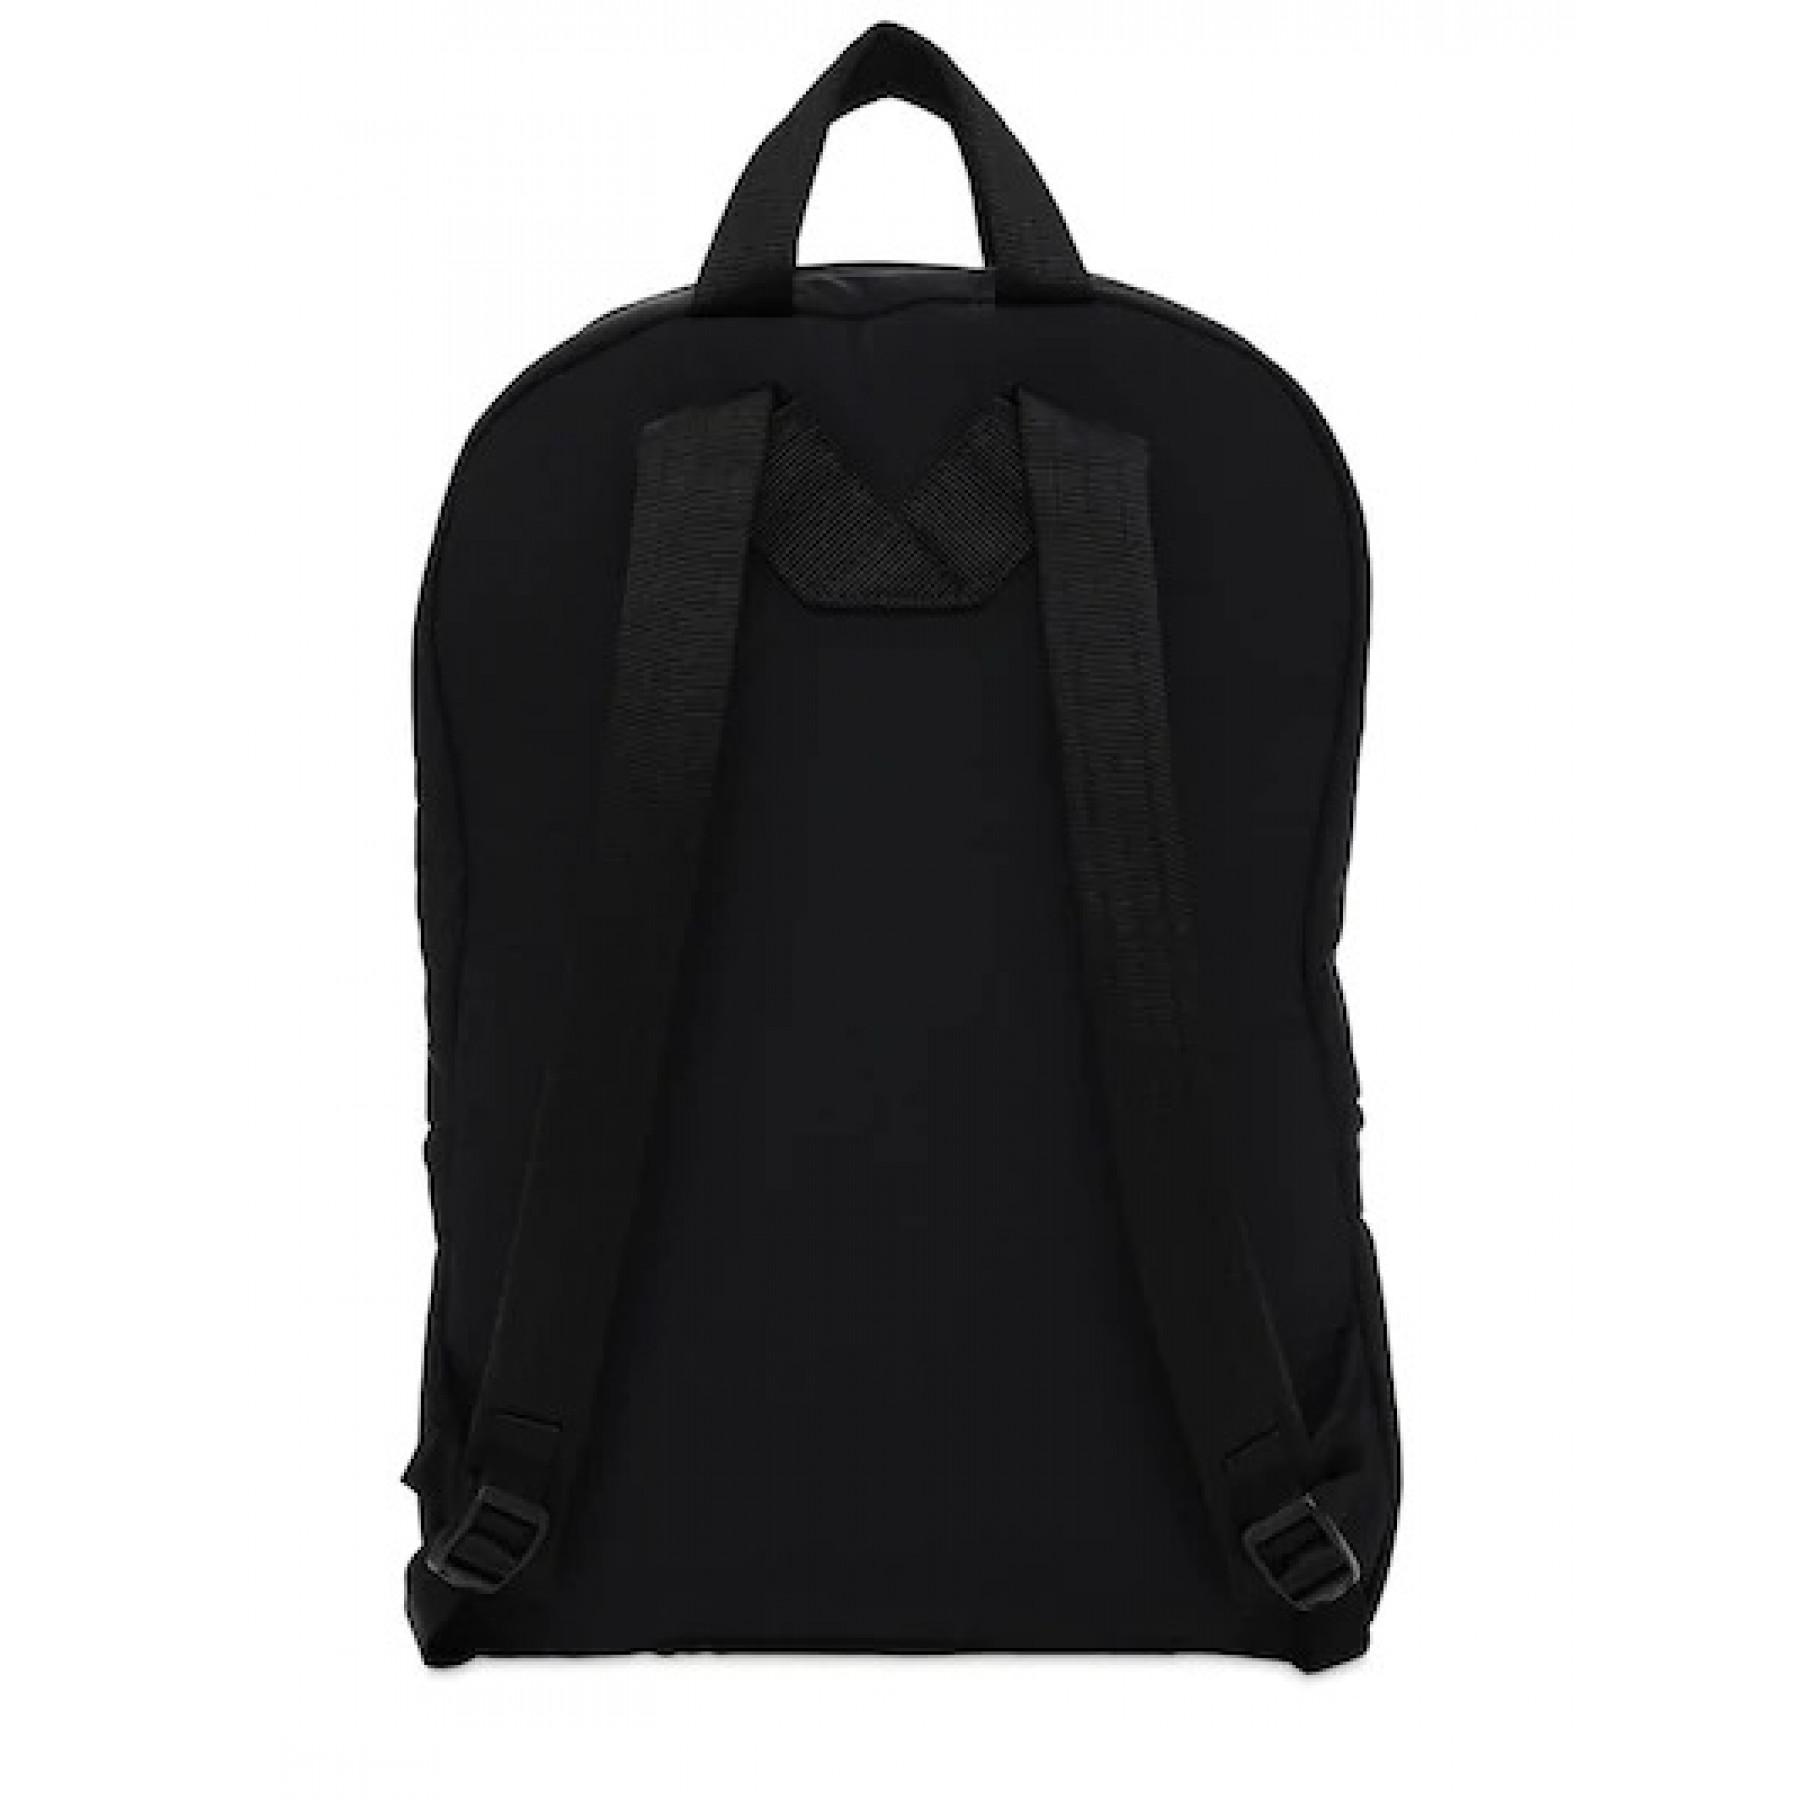 Torba The North Face City Voyager Daypack